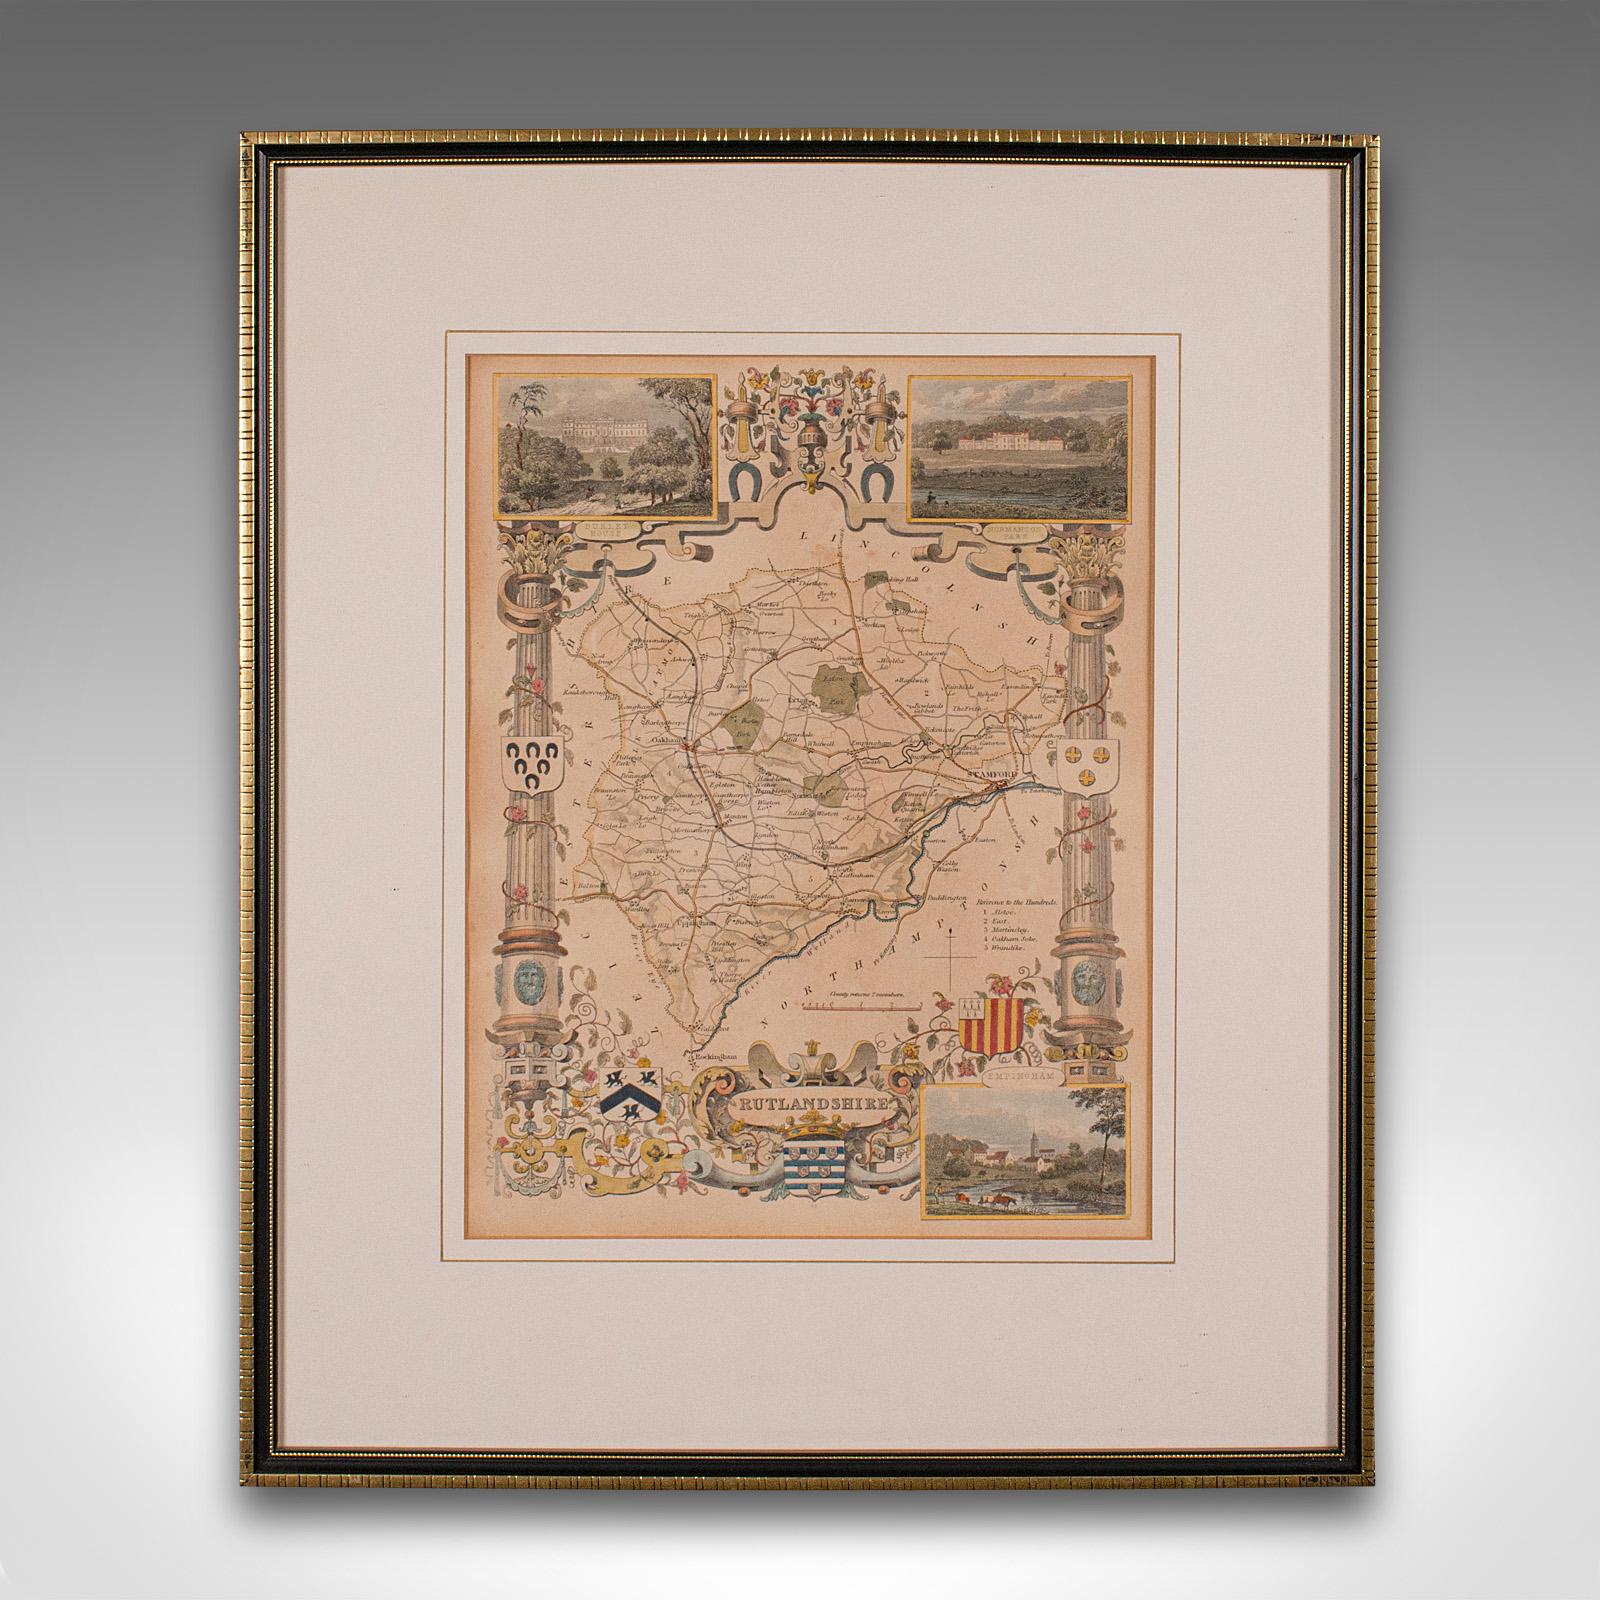 This is an antique lithography map of Rutlandshire. An English, framed atlas engraving of cartographic interest, dating to the mid 19th century and later.

Superb lithography of Rutlandshire and its county detail, perfect for display
Displaying a